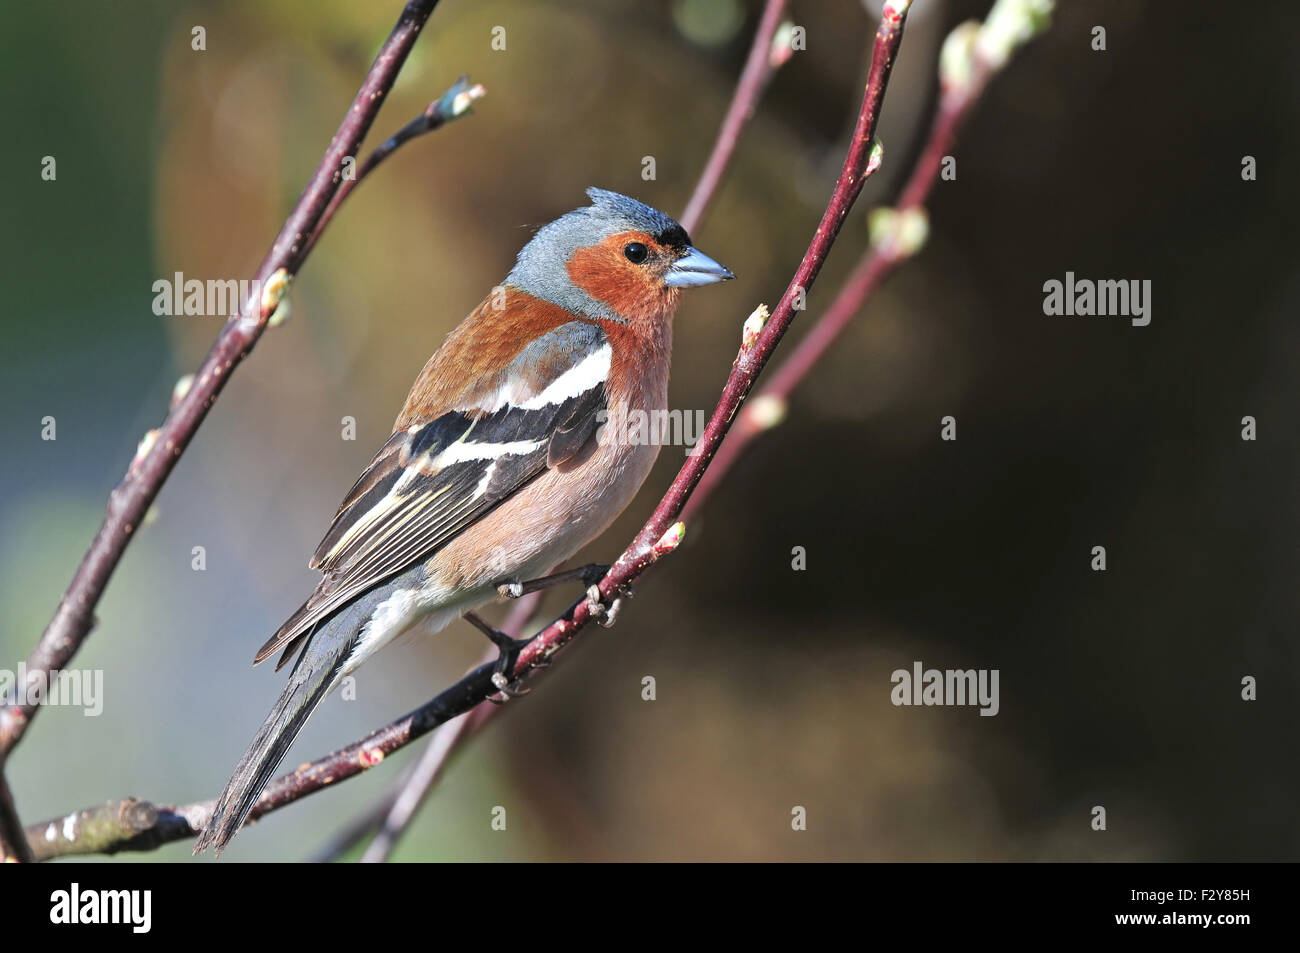 Chaffinch in spring colored feathers standing on a twig Stock Photo